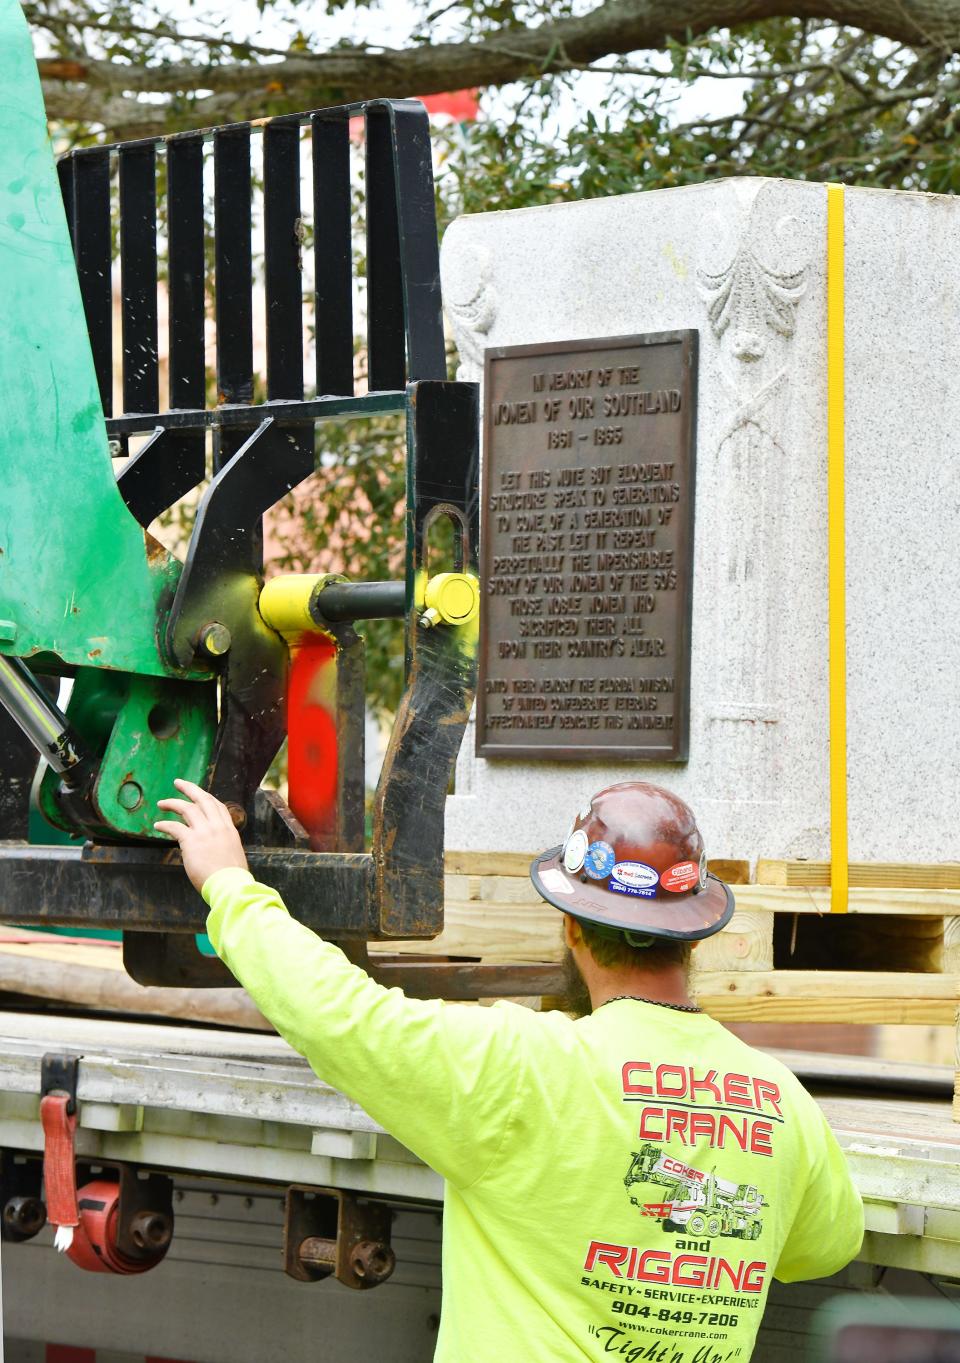 The pedestal and commemorative plaque that held the bronze statue of a women reading to two children is moved to the bed of a flatbed truck after being removed from the "Women of the Southland" monument Dec. 27 in Springfield Park.